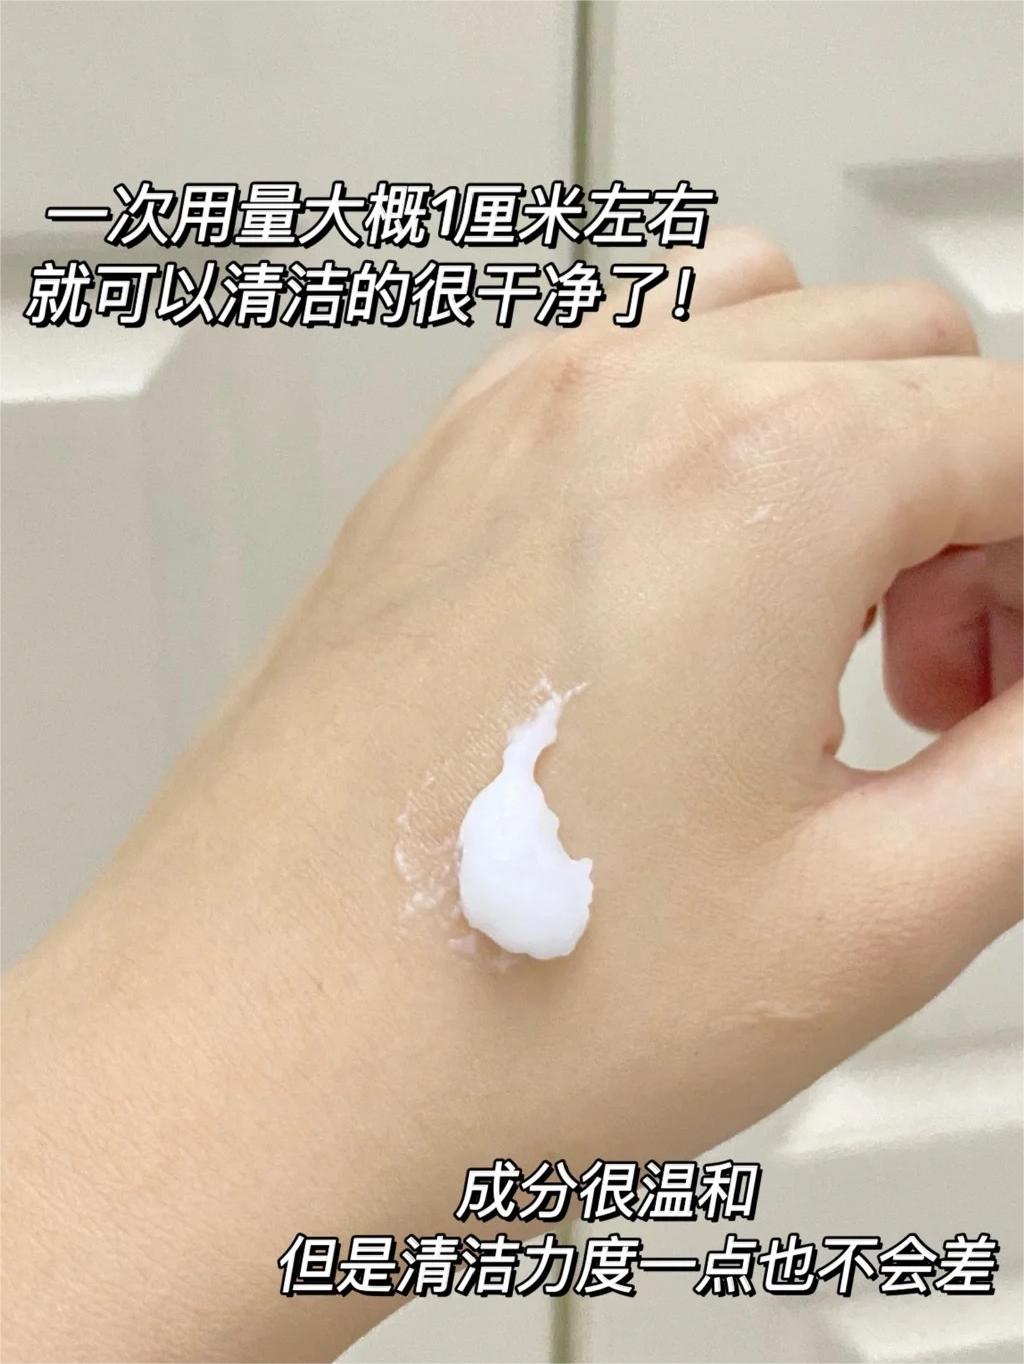 Zhiben Soothing Recovery Facial Cleanser 至本舒颜修护洁面乳 120g